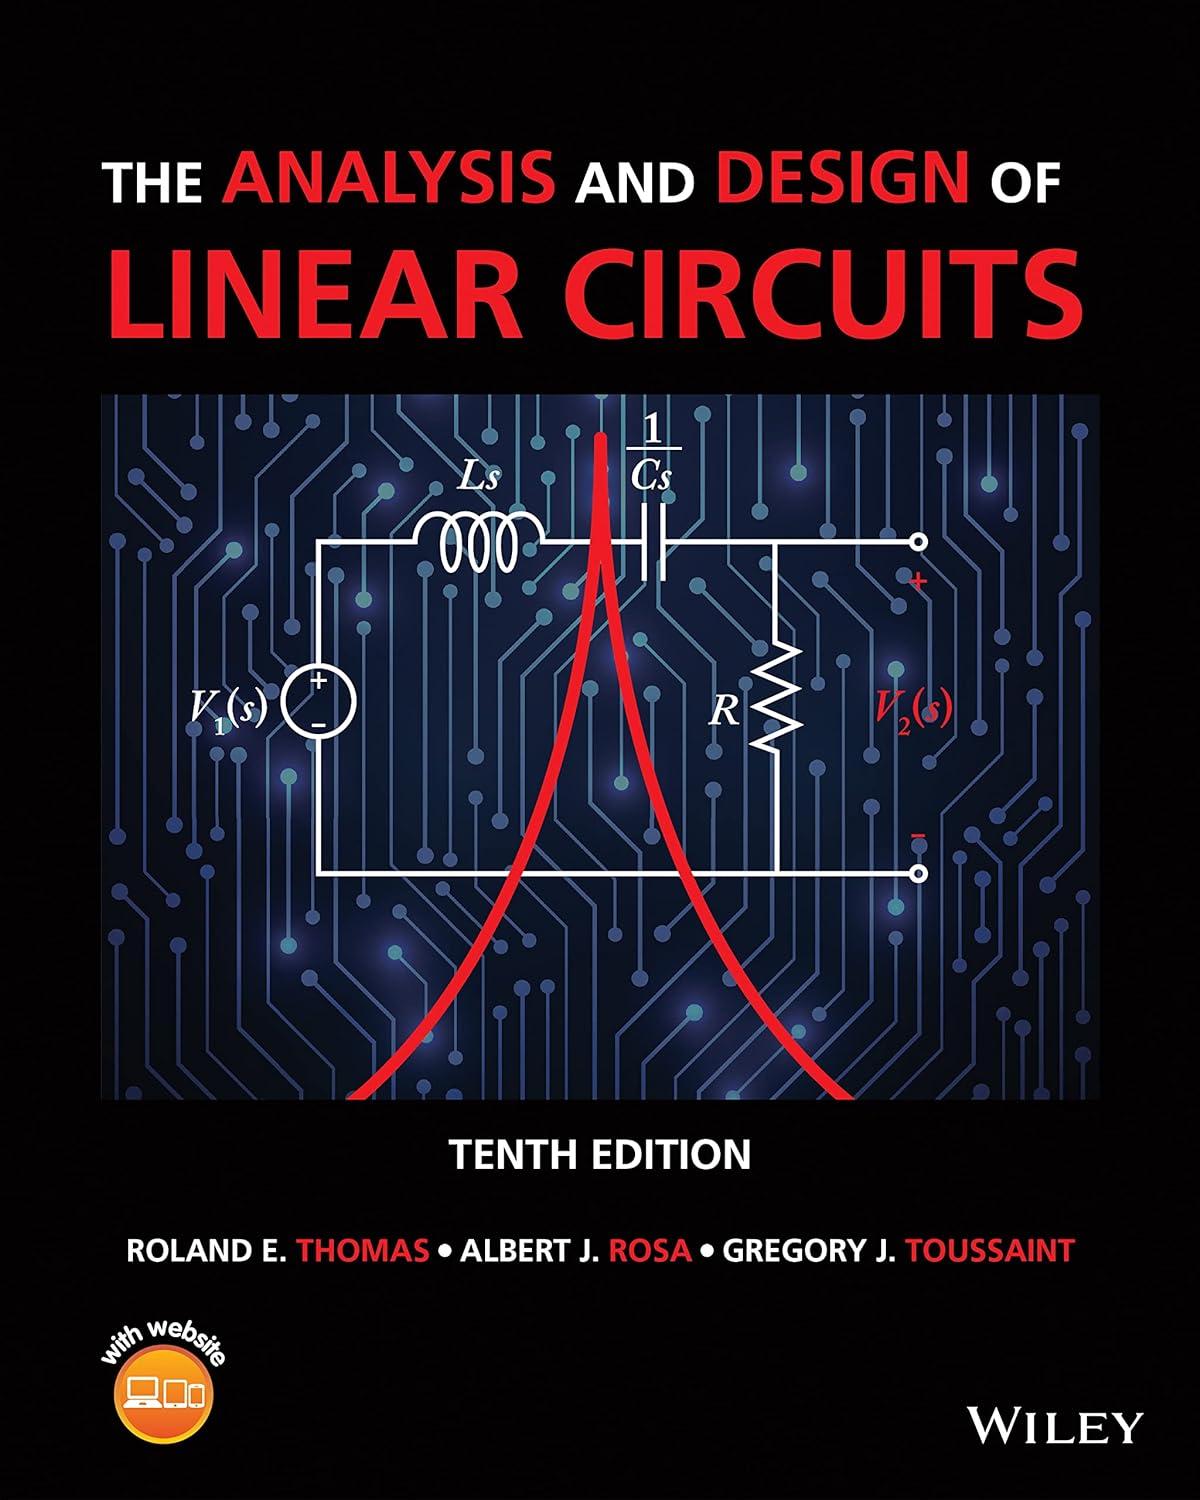 the analysis and design of linear circuits 10th edition roland e. thomas, albert j. rosa, gregory j.